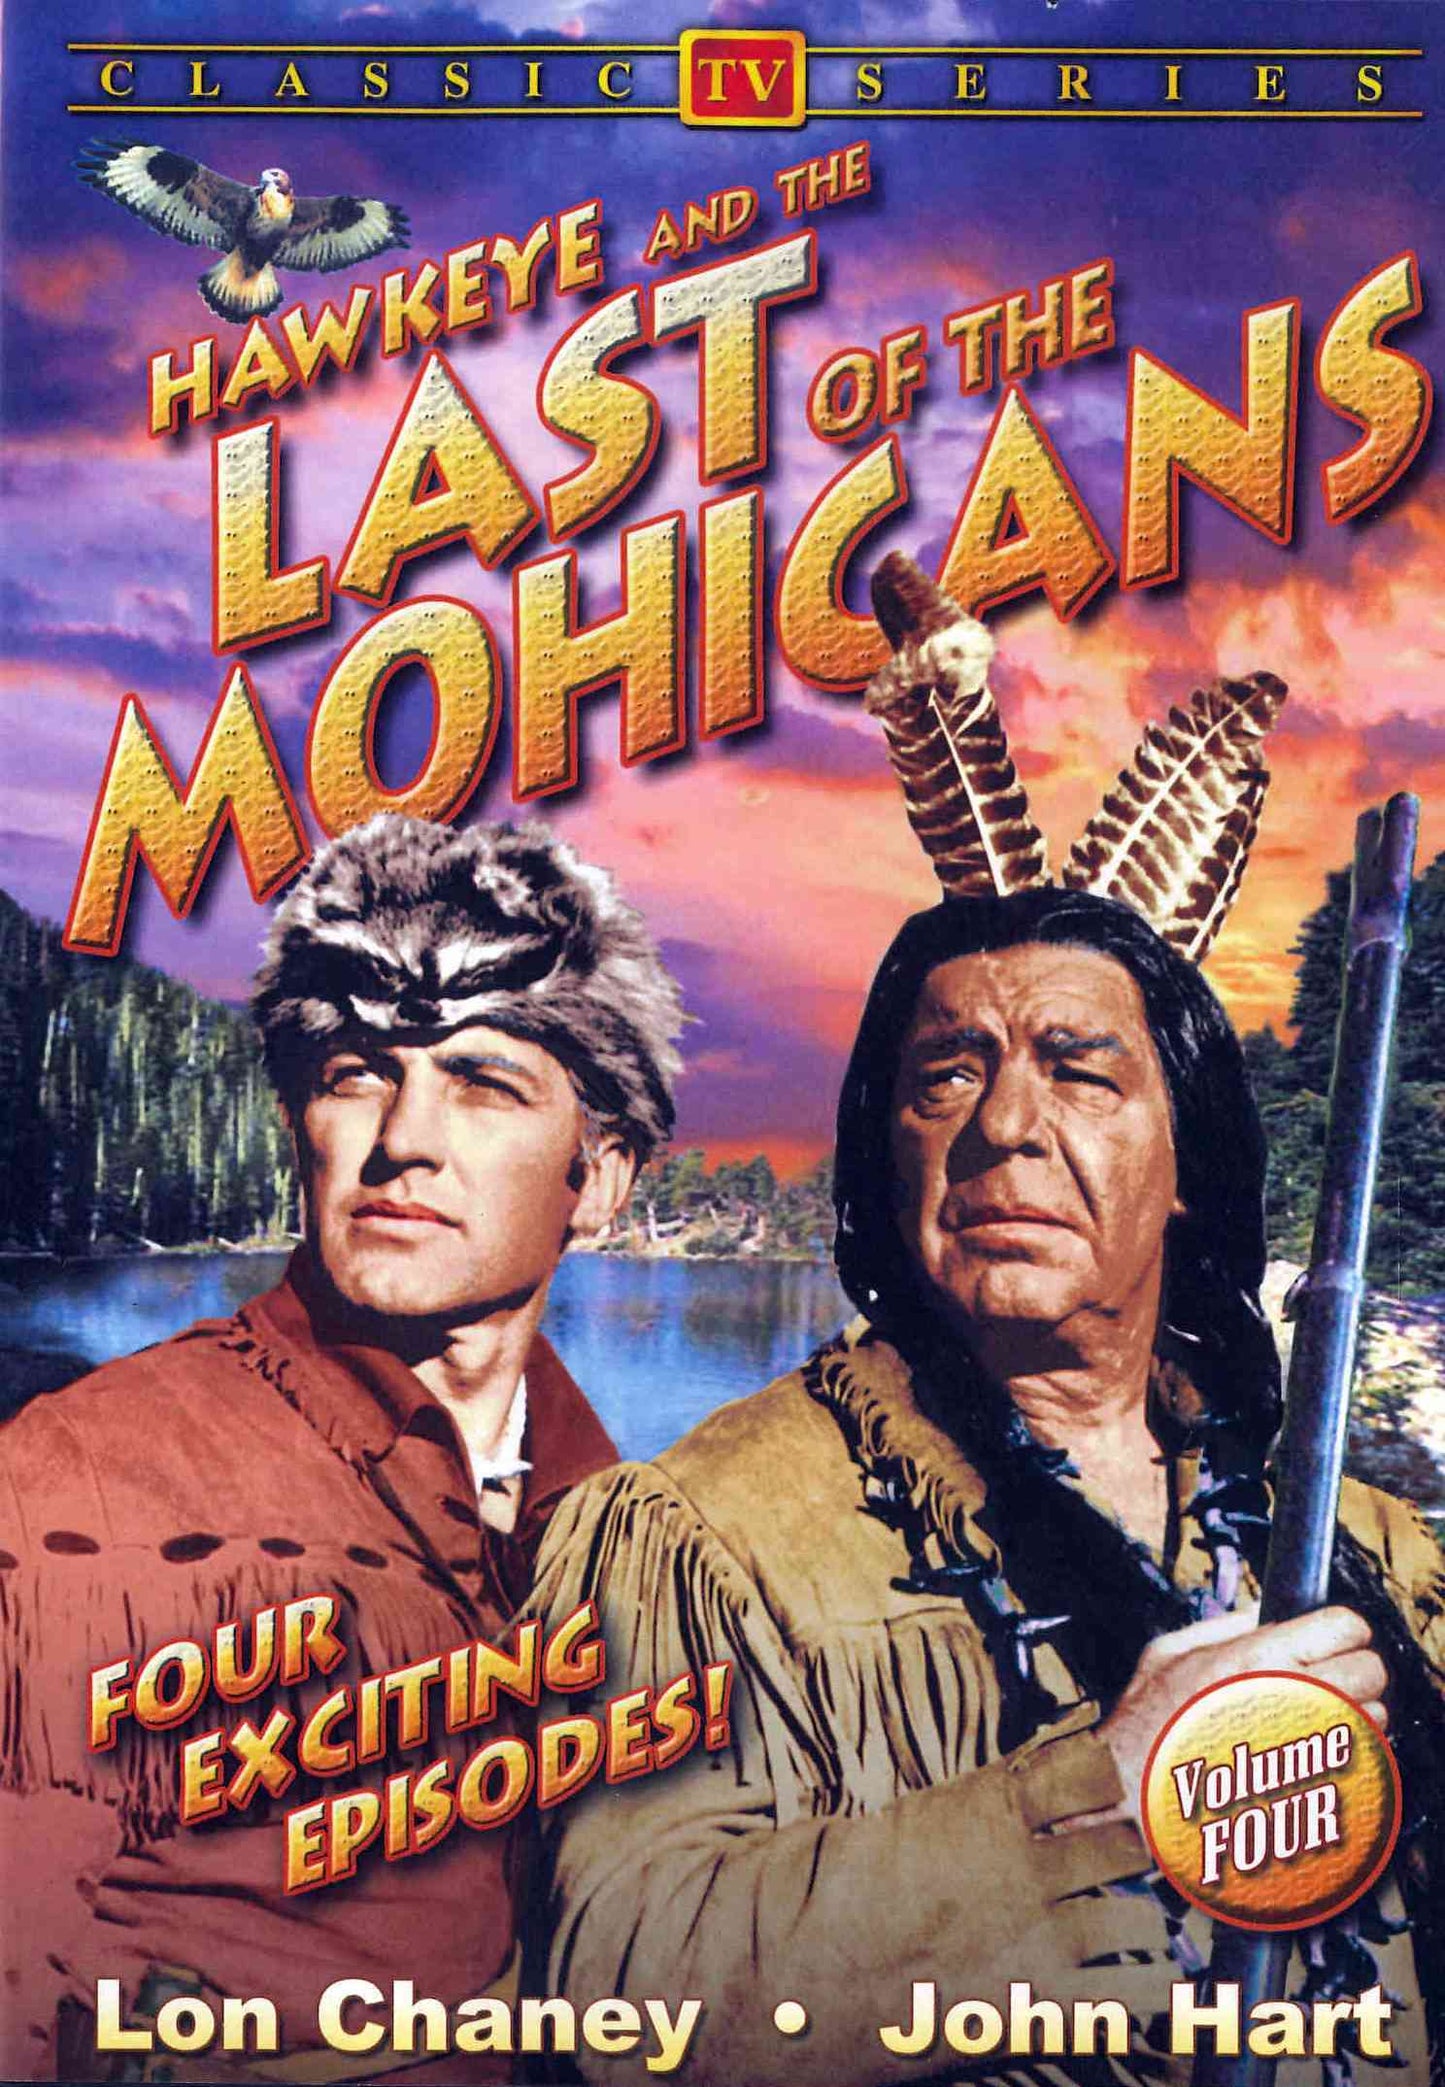 Hawkeye And The Last of The Mohicans - Vol. 4 cover art